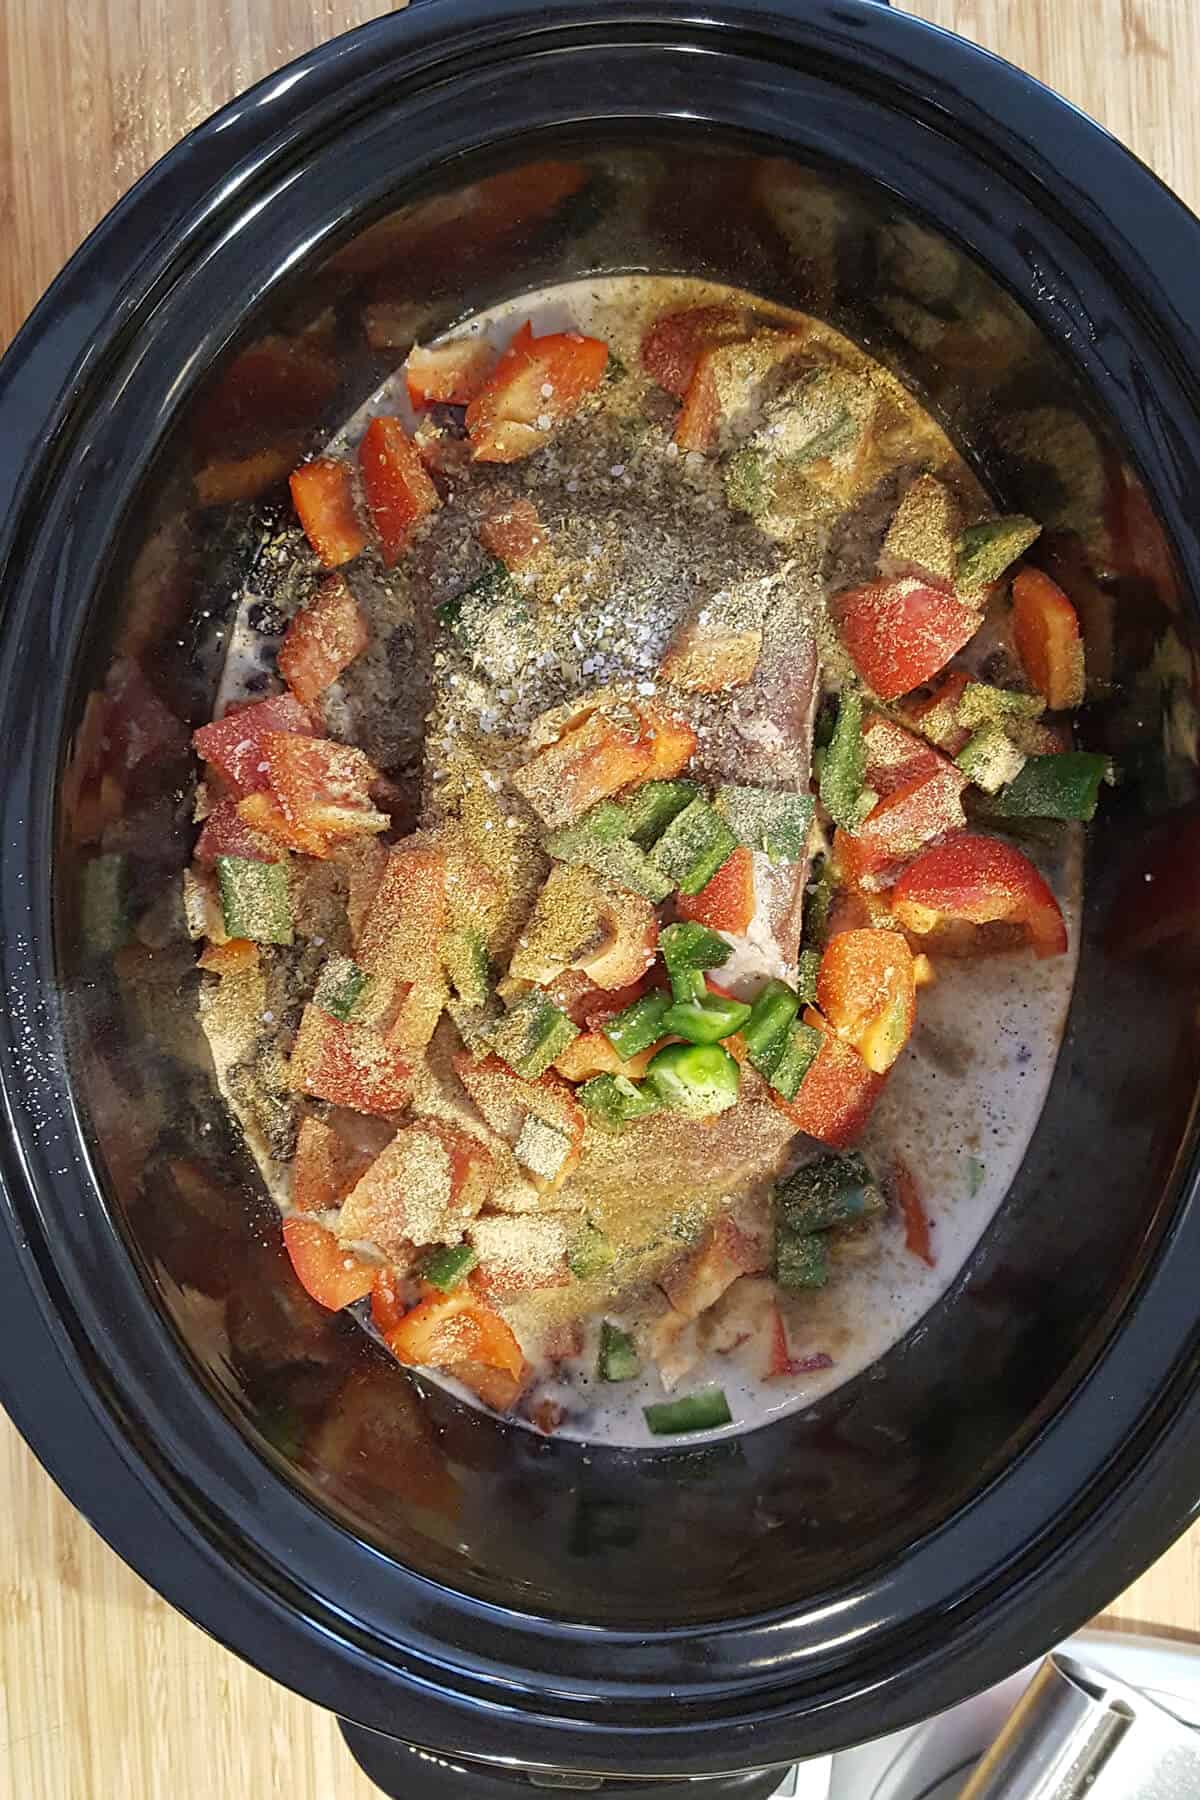 All ingredients added to a slow cooker vessel.